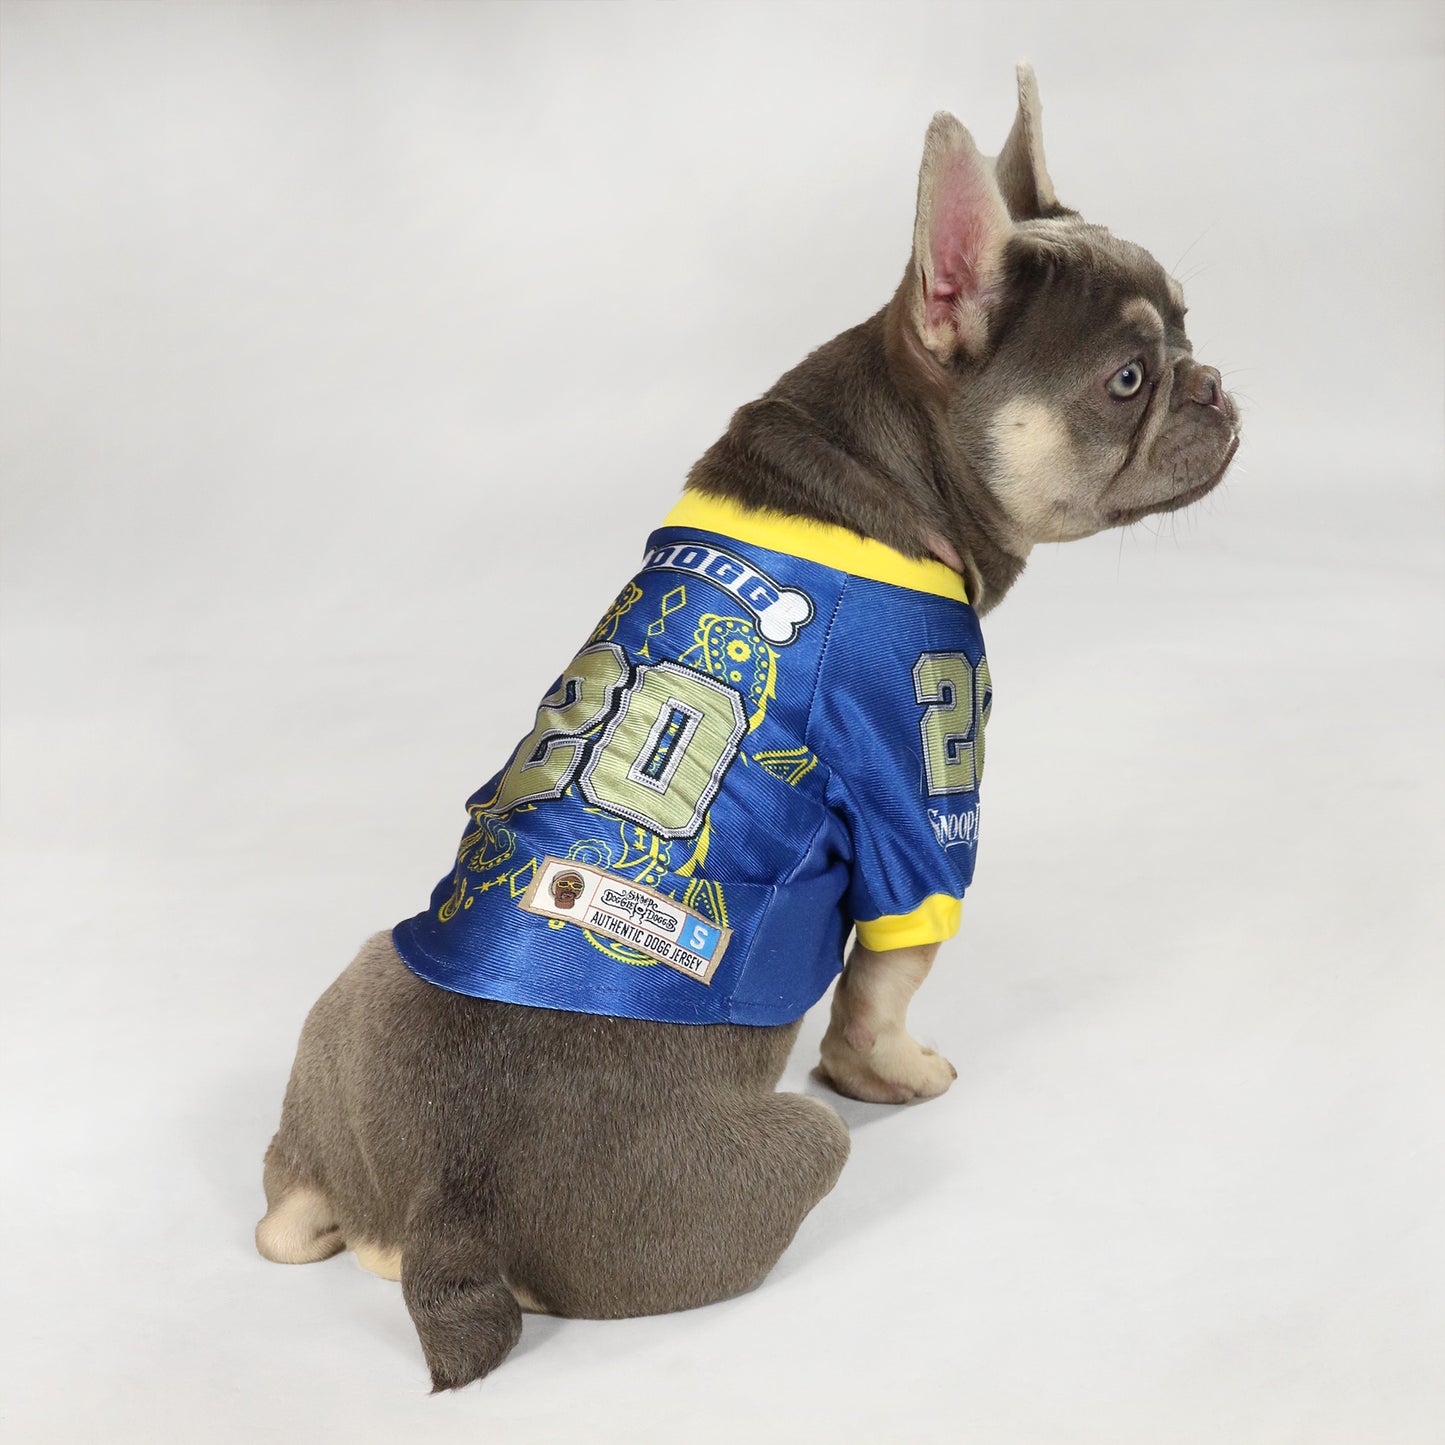 Bealls the French Bulldog wearing the Halftime Deluxe Pet Jersey in size Small.